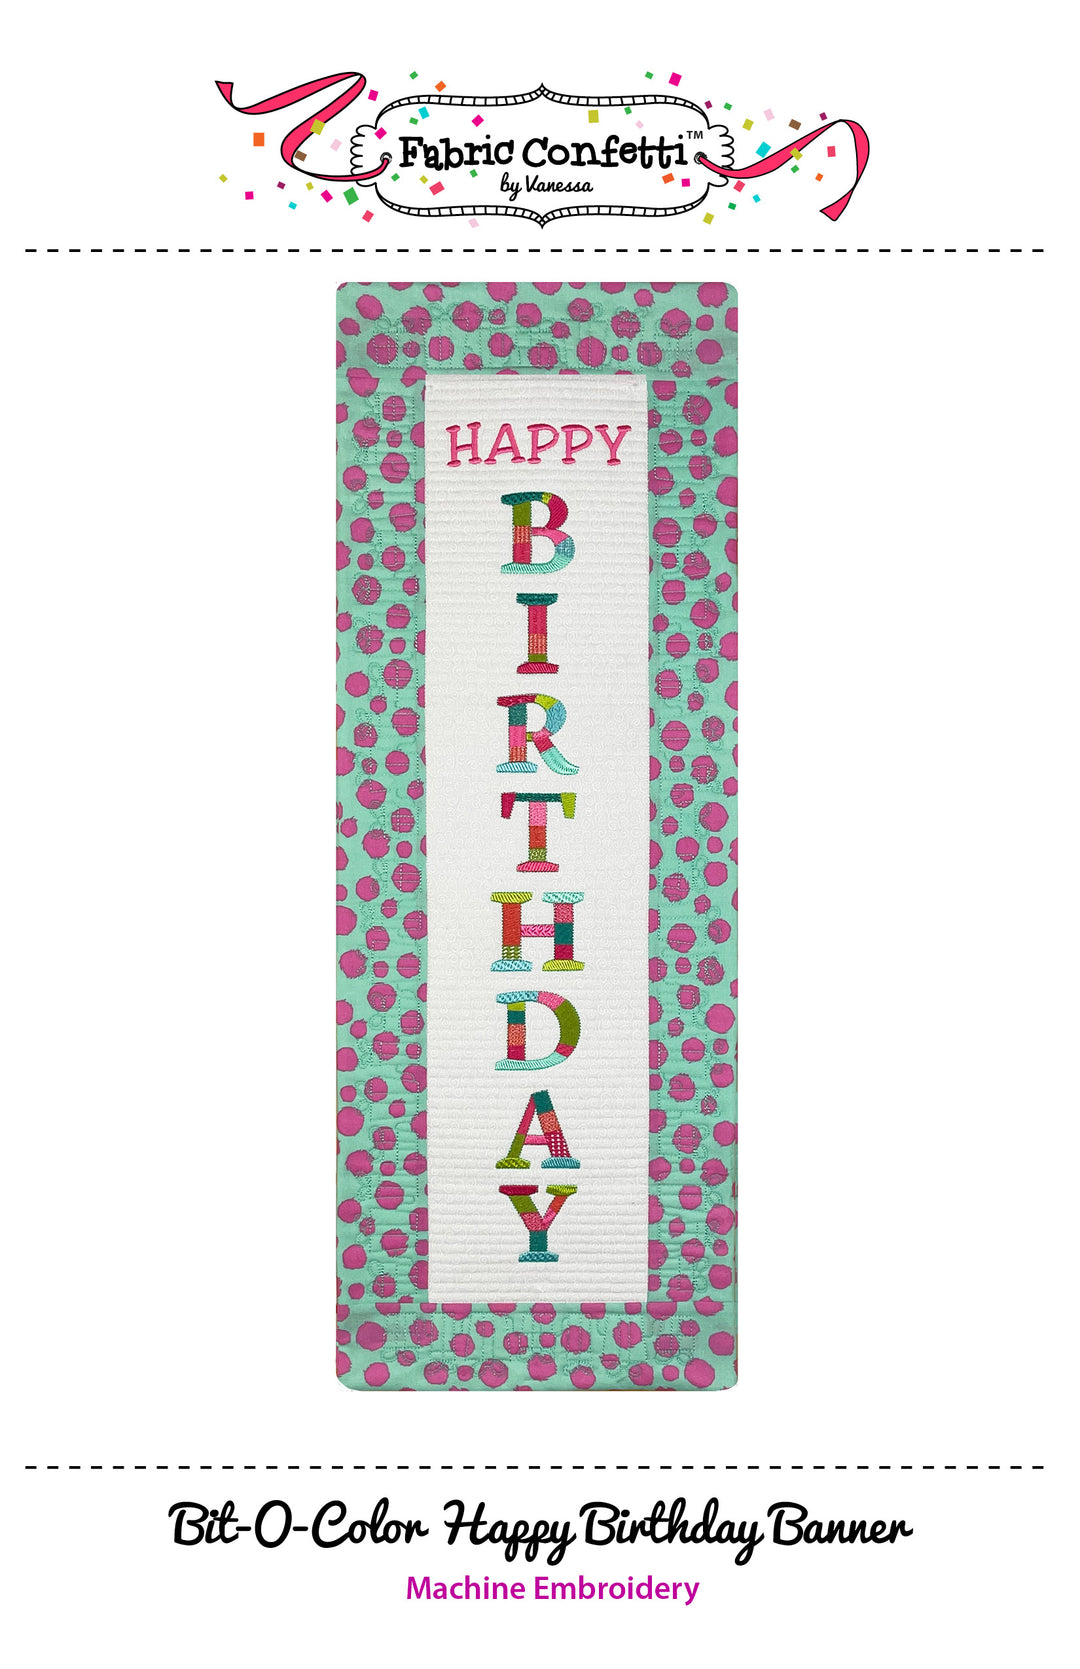 Bit-O-Color Happy Birthday Quilted Banner